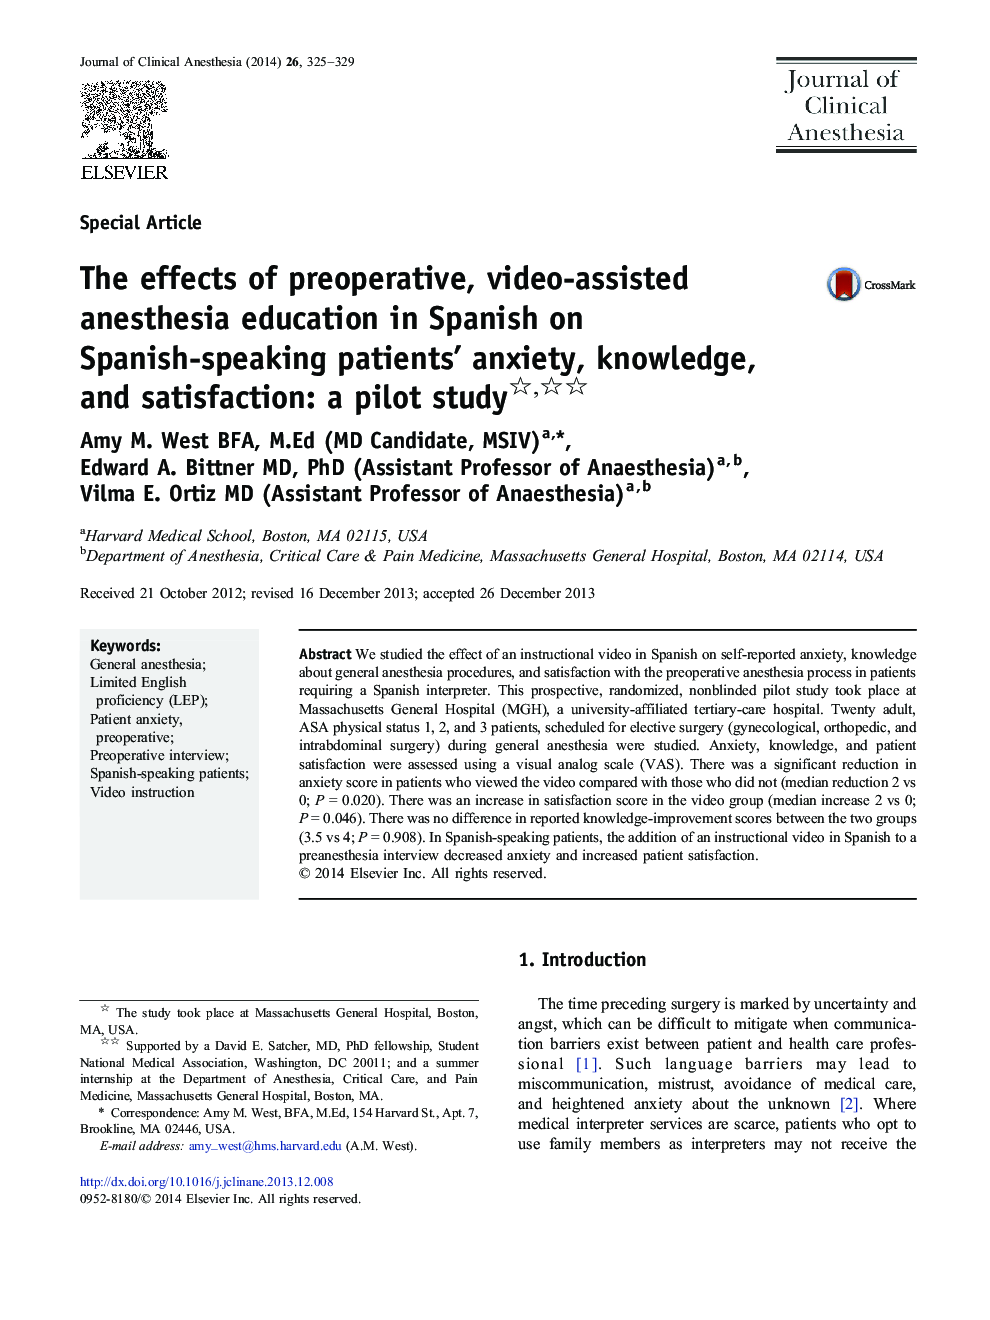 The effects of preoperative, video-assisted anesthesia education in Spanish on Spanish-speaking patients’ anxiety, knowledge, and satisfaction: a pilot study 